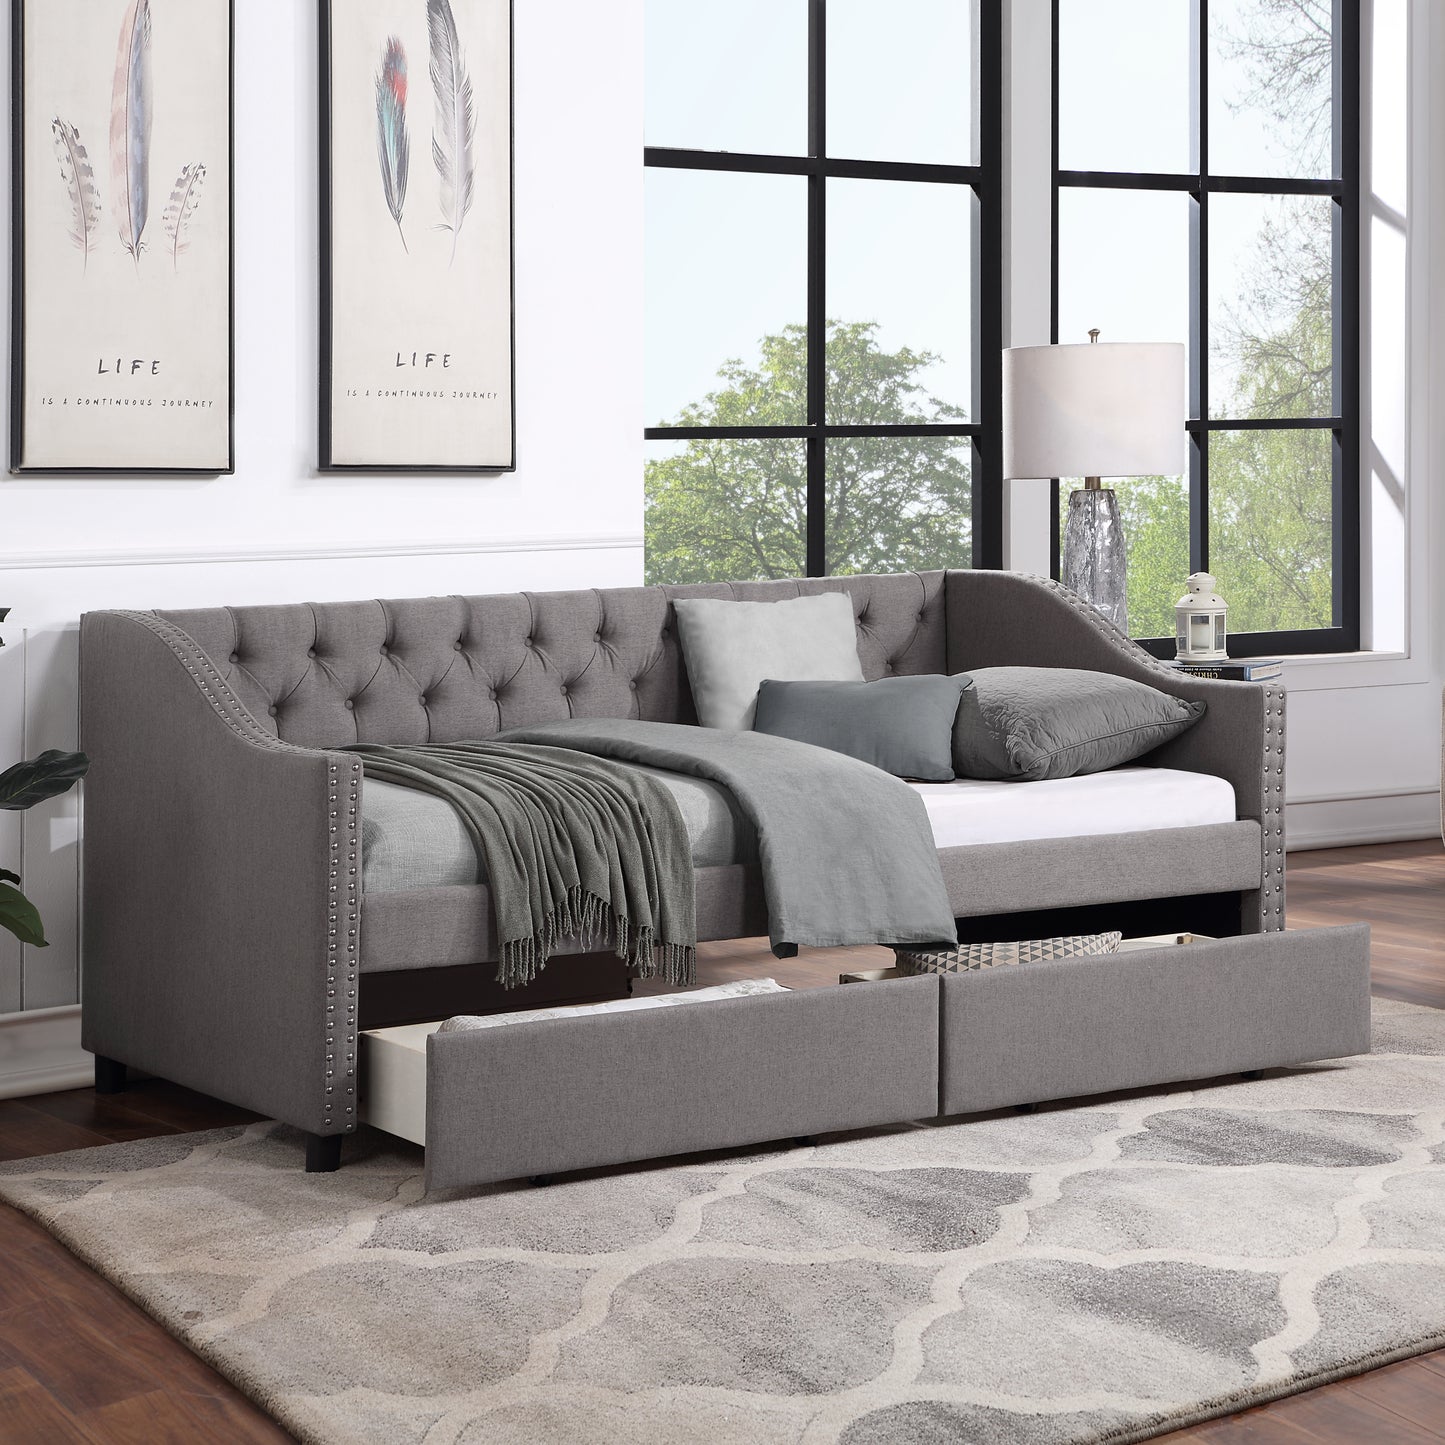 Upholstered Twin Size daybed with Two Drawers, Wood Slat Support, Gray